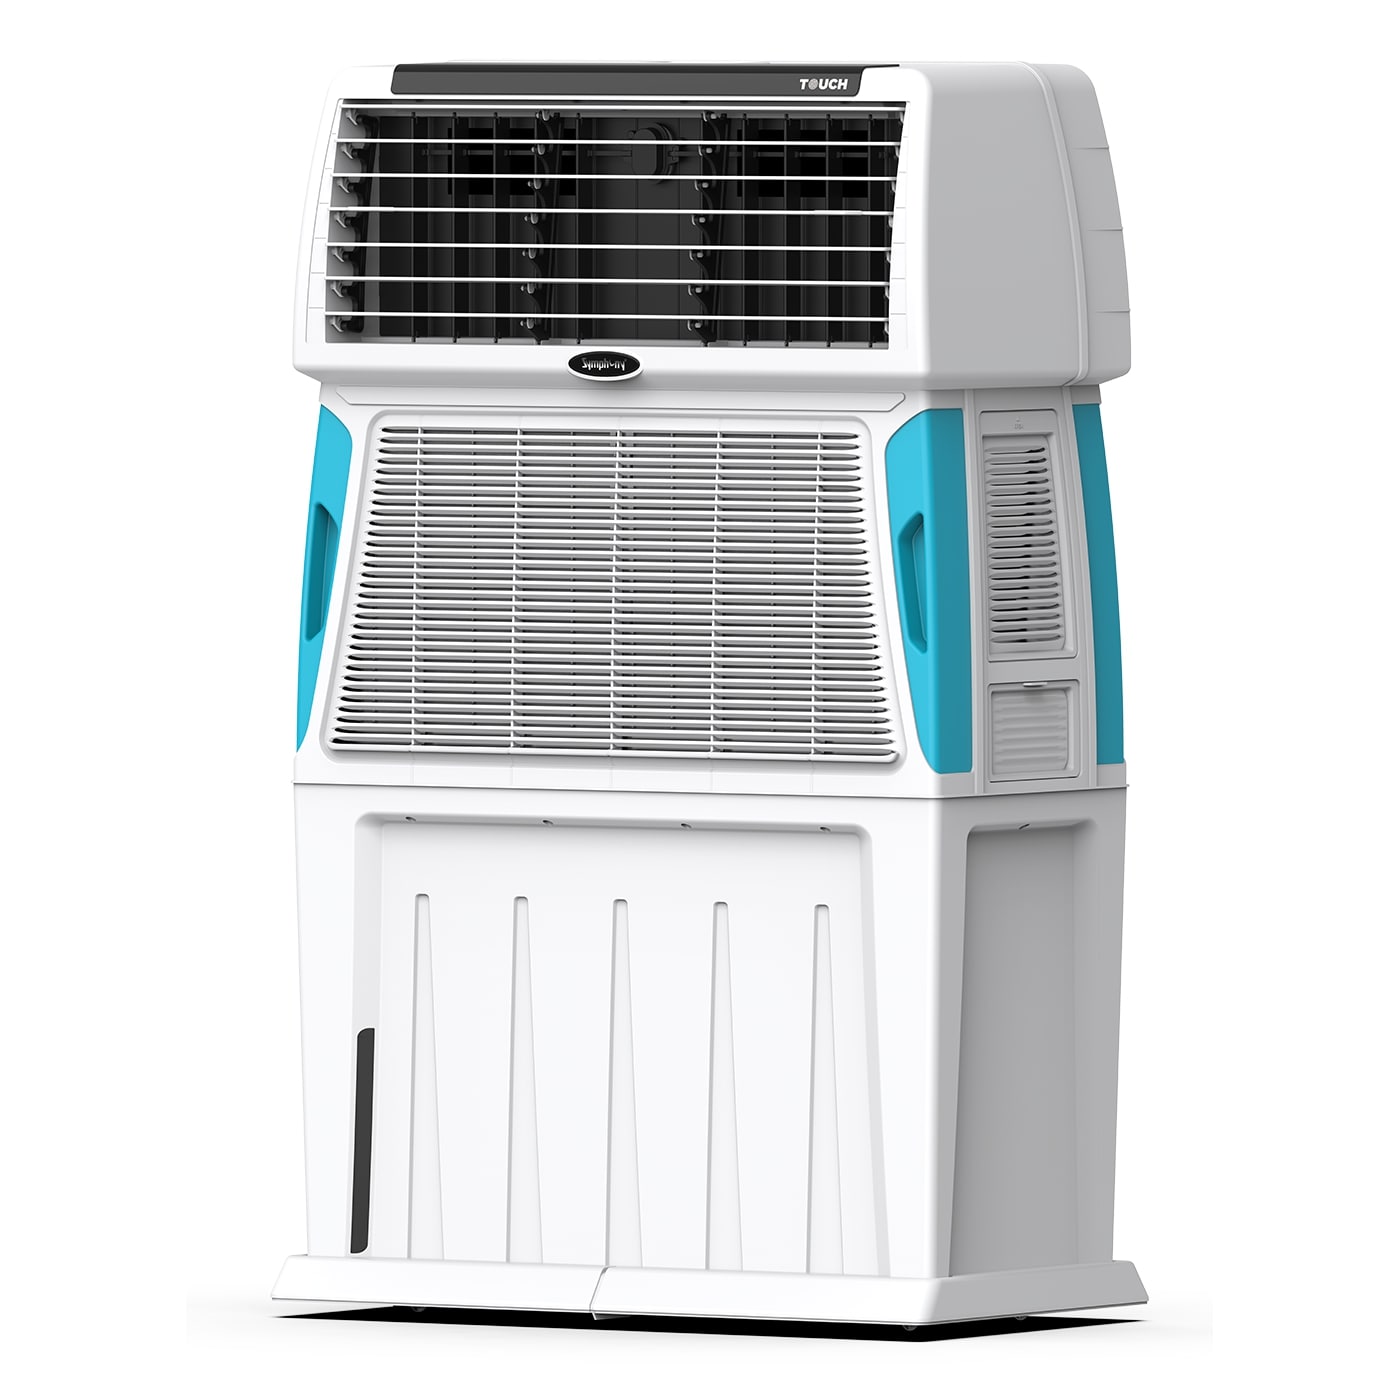 Top-rated room coolers with a 110-litre capacity